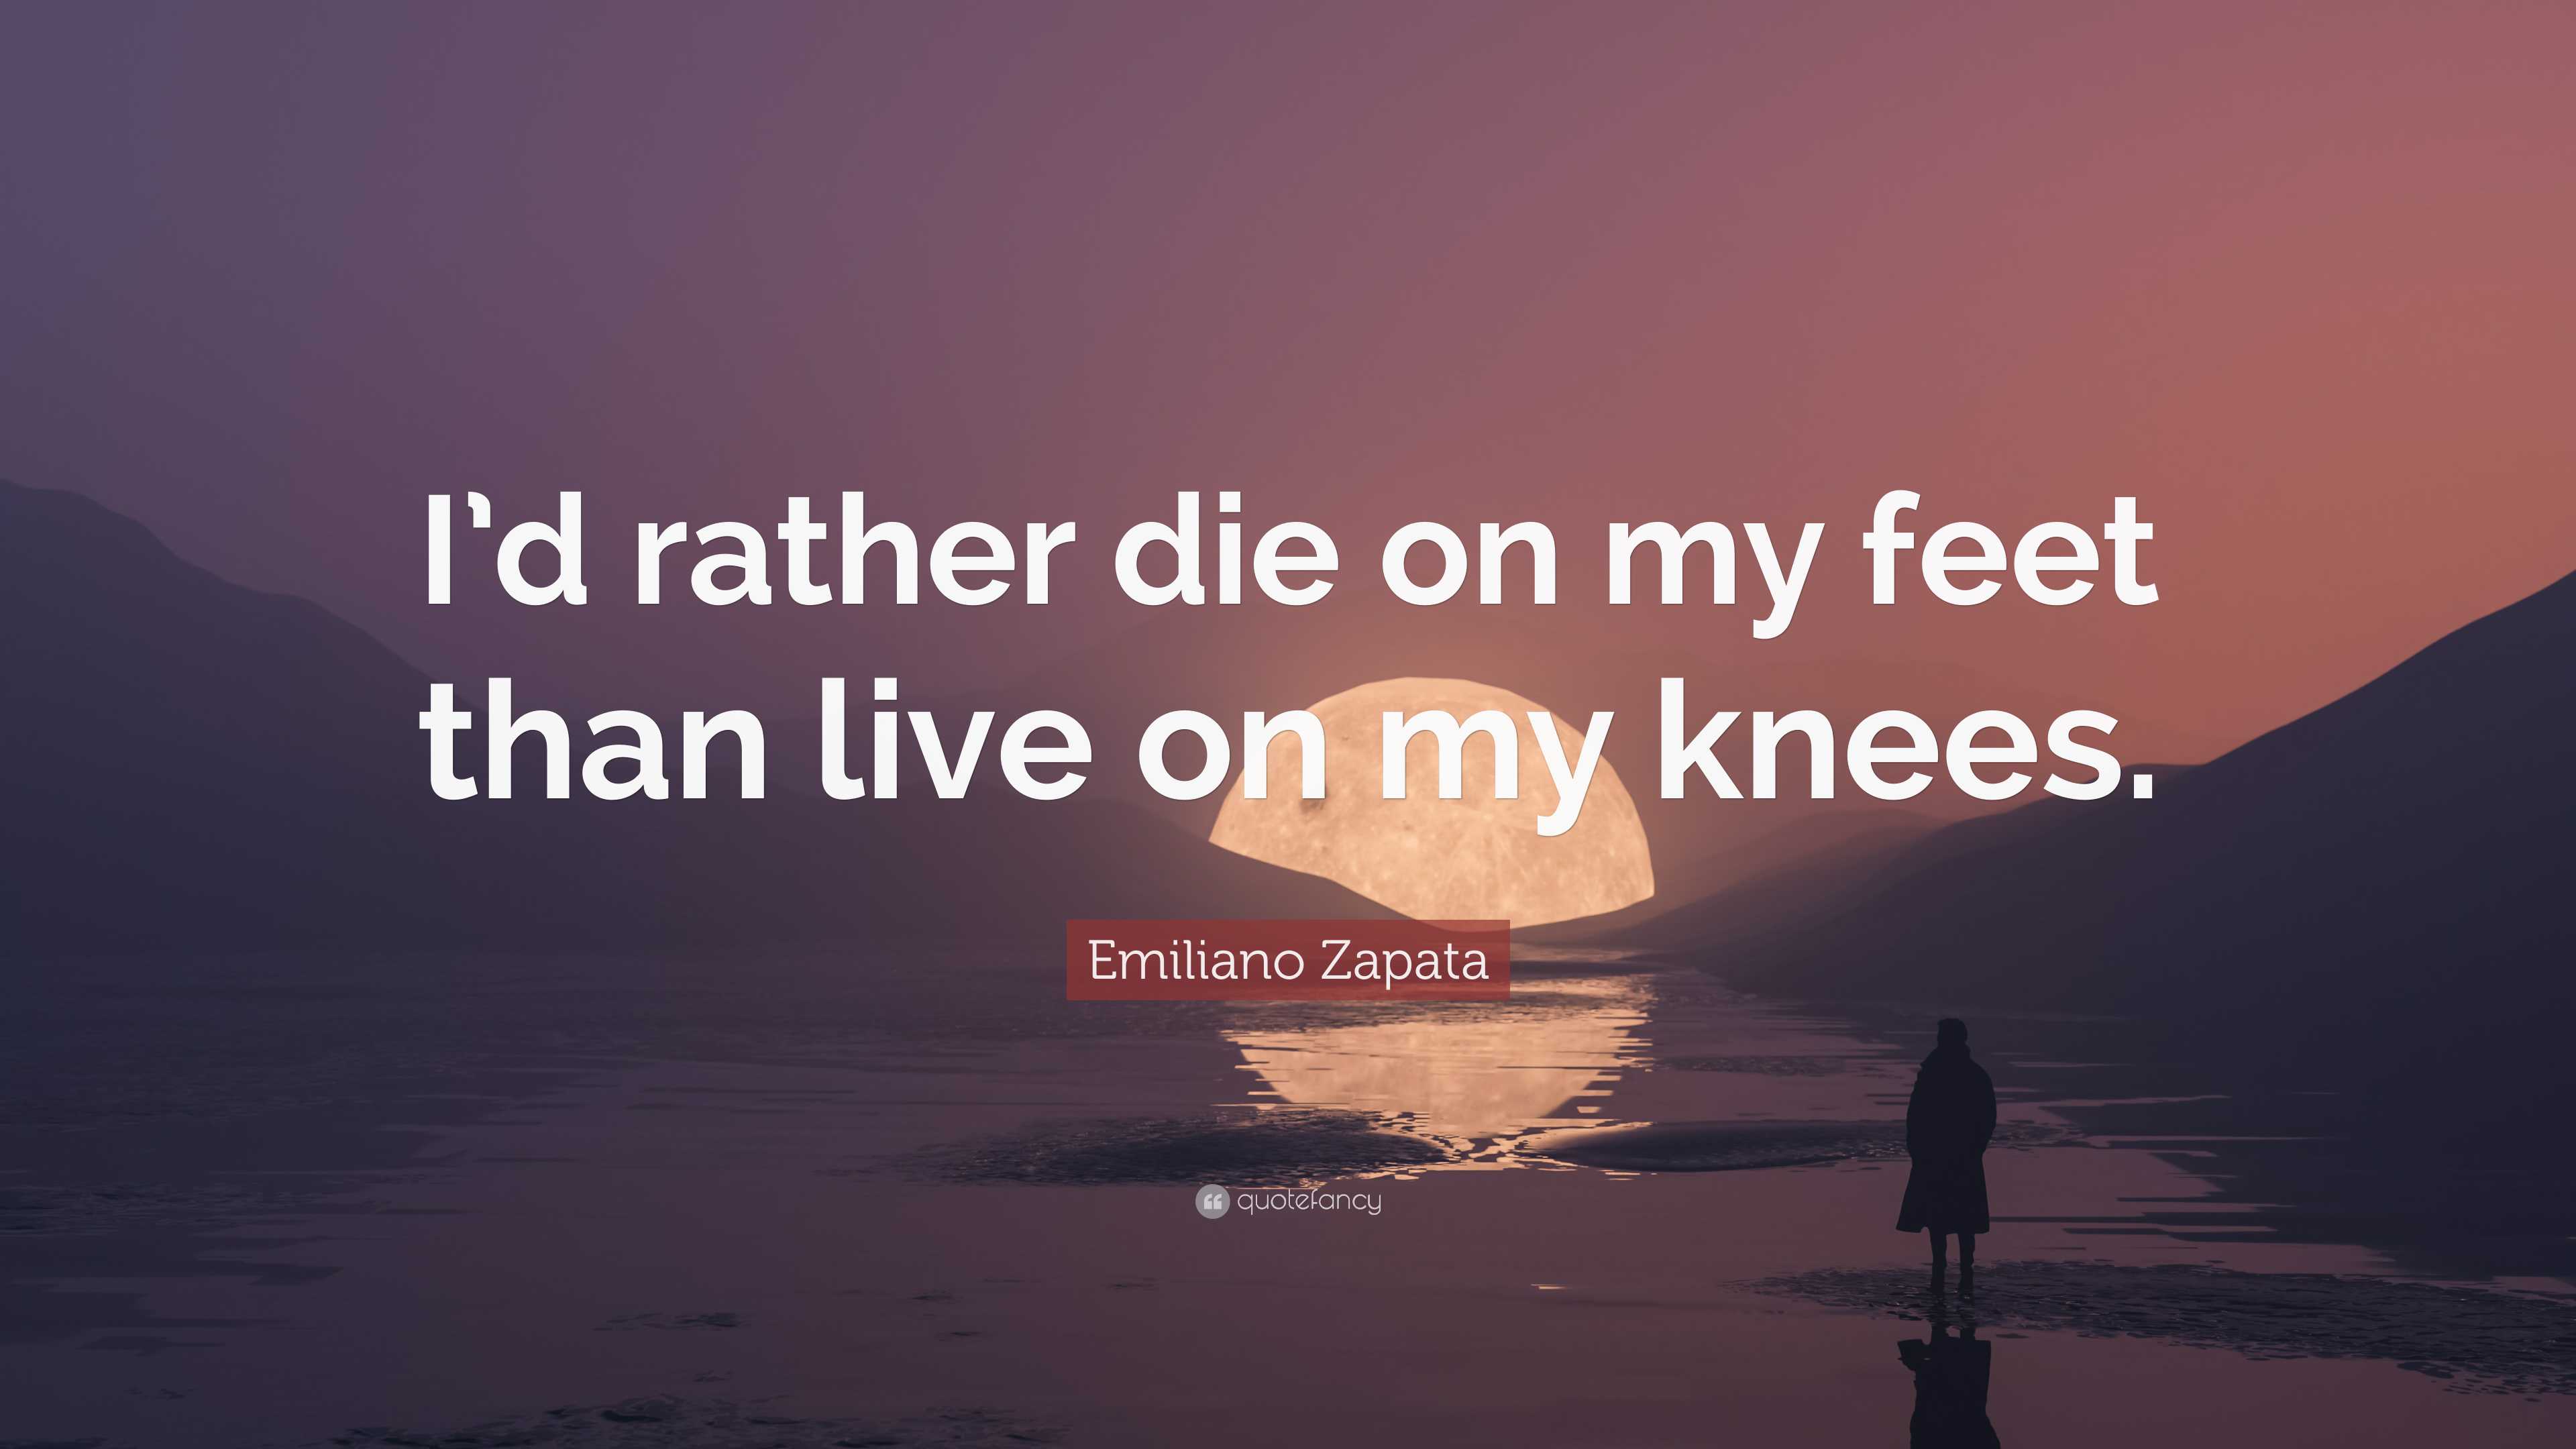 Emiliano Zapata Quote: “I’d rather die on my feet than live on my knees.”